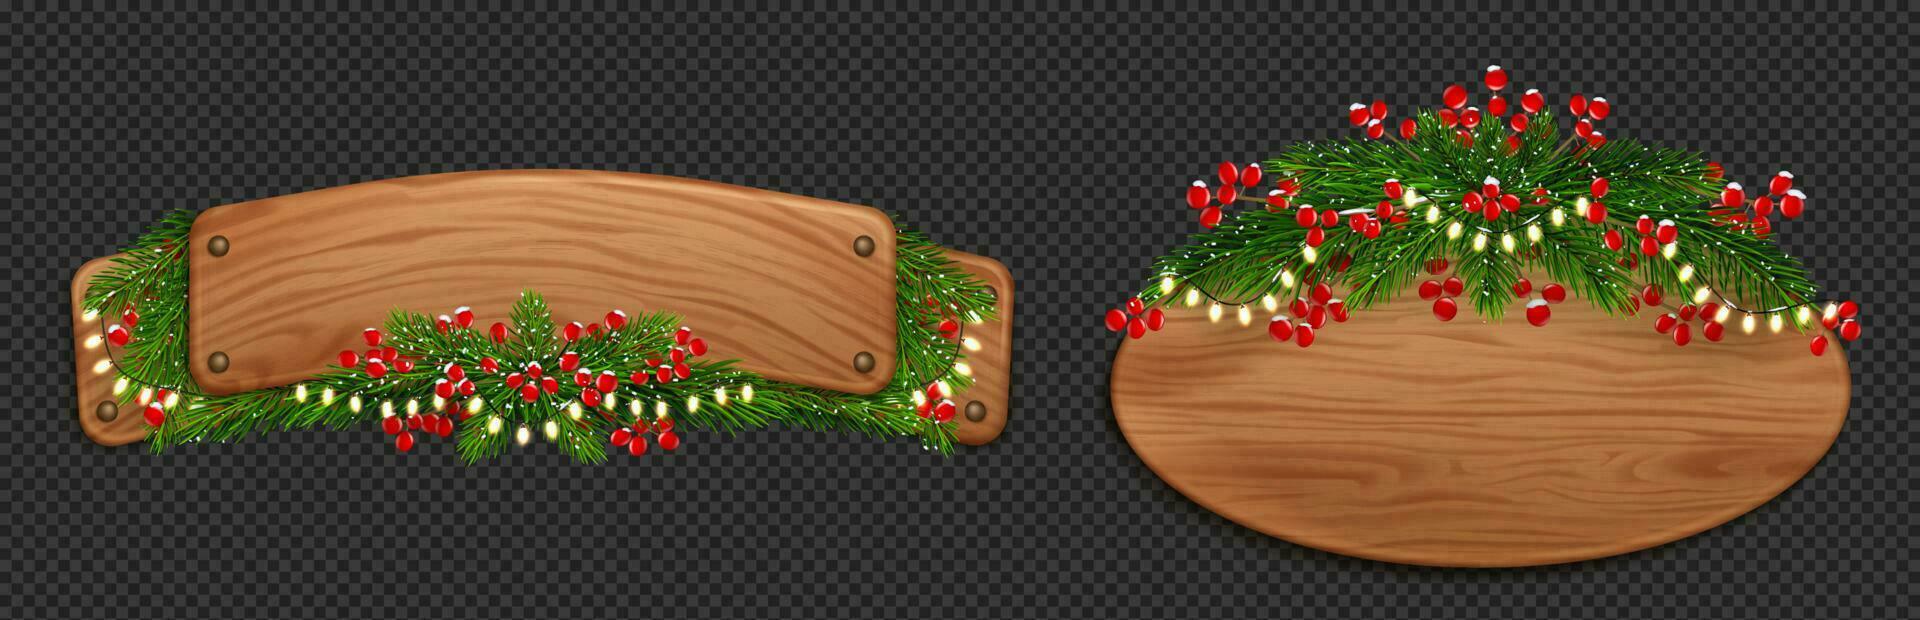 Christmas wood sign board with fir and red berries vector